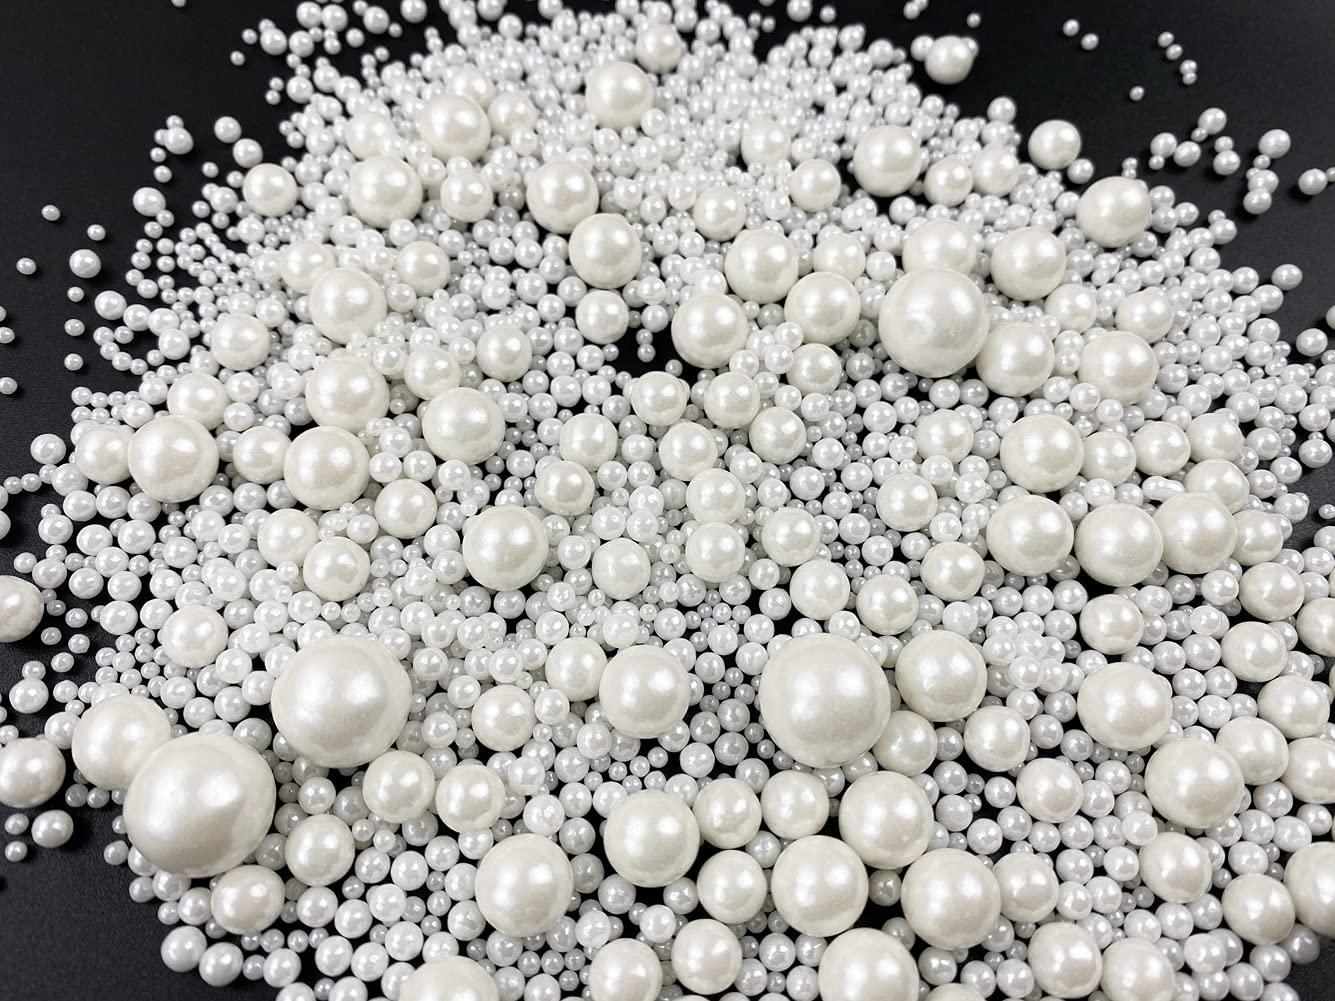  Kasvan White Pearl Sugar Sprinkles - Edible Candy Pearls  130g/4.58 Oz, Mix Size, Baking Cake Decorations, Ice Cream Toppings and  Cookie Decorating, Wedding Party Chirstmas Supplies (White) : Grocery &  Gourmet